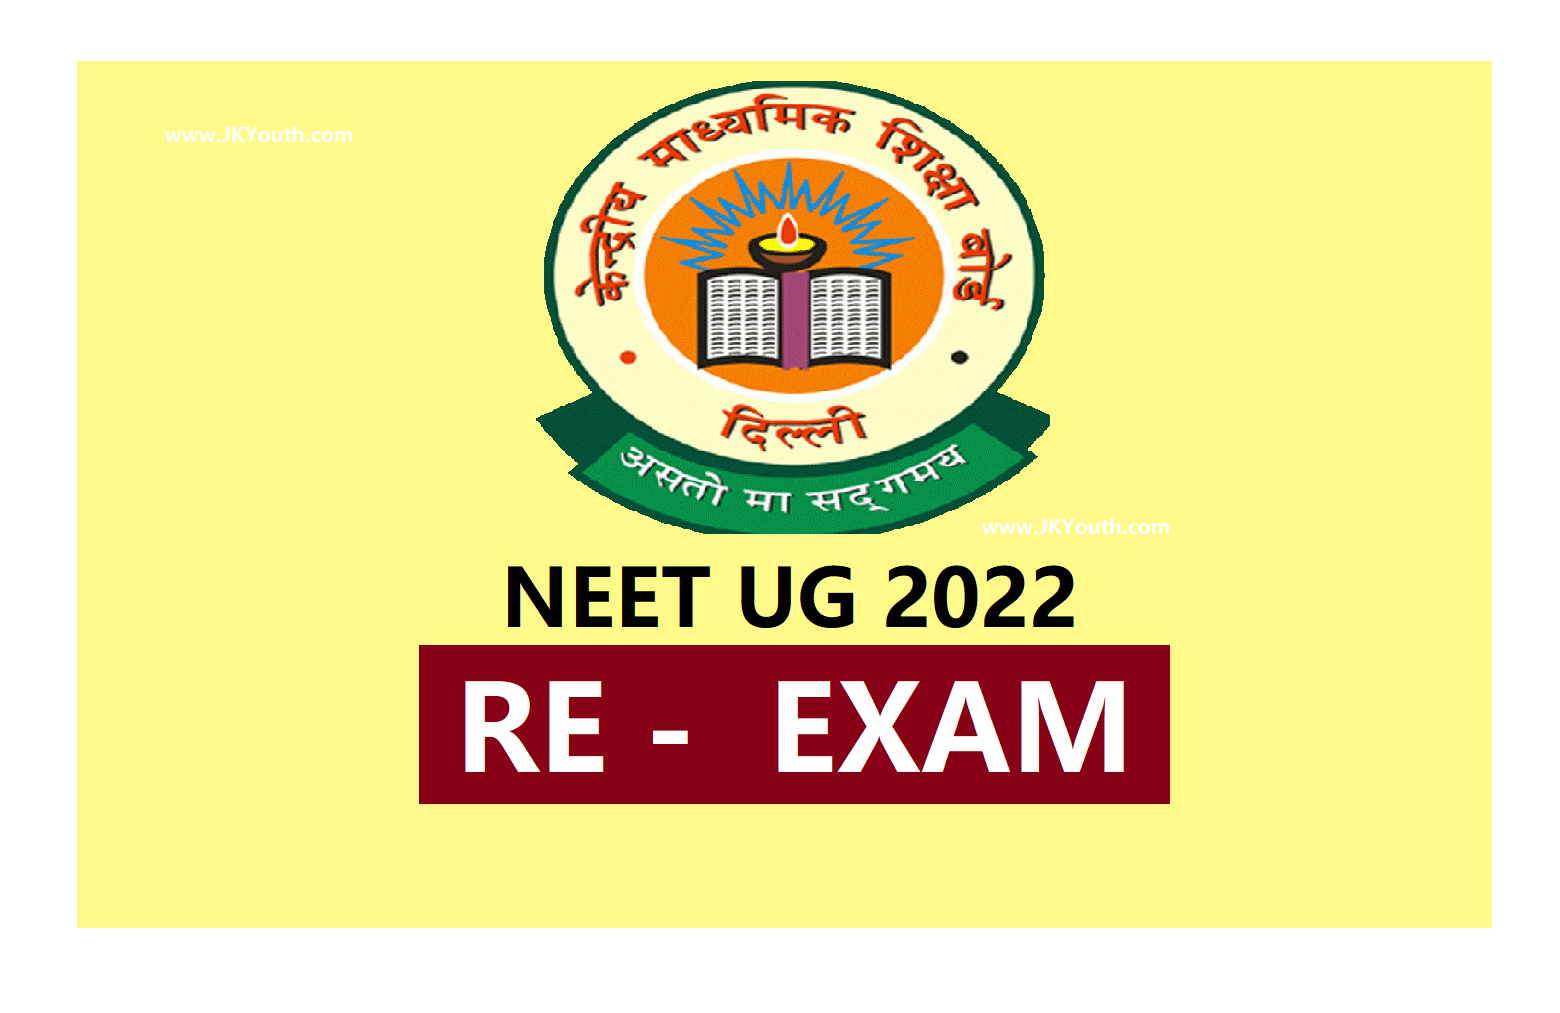 NEET UG 2022 Re-Exam: Health Minister assures reexam for candidates who got wrong medium paper 1